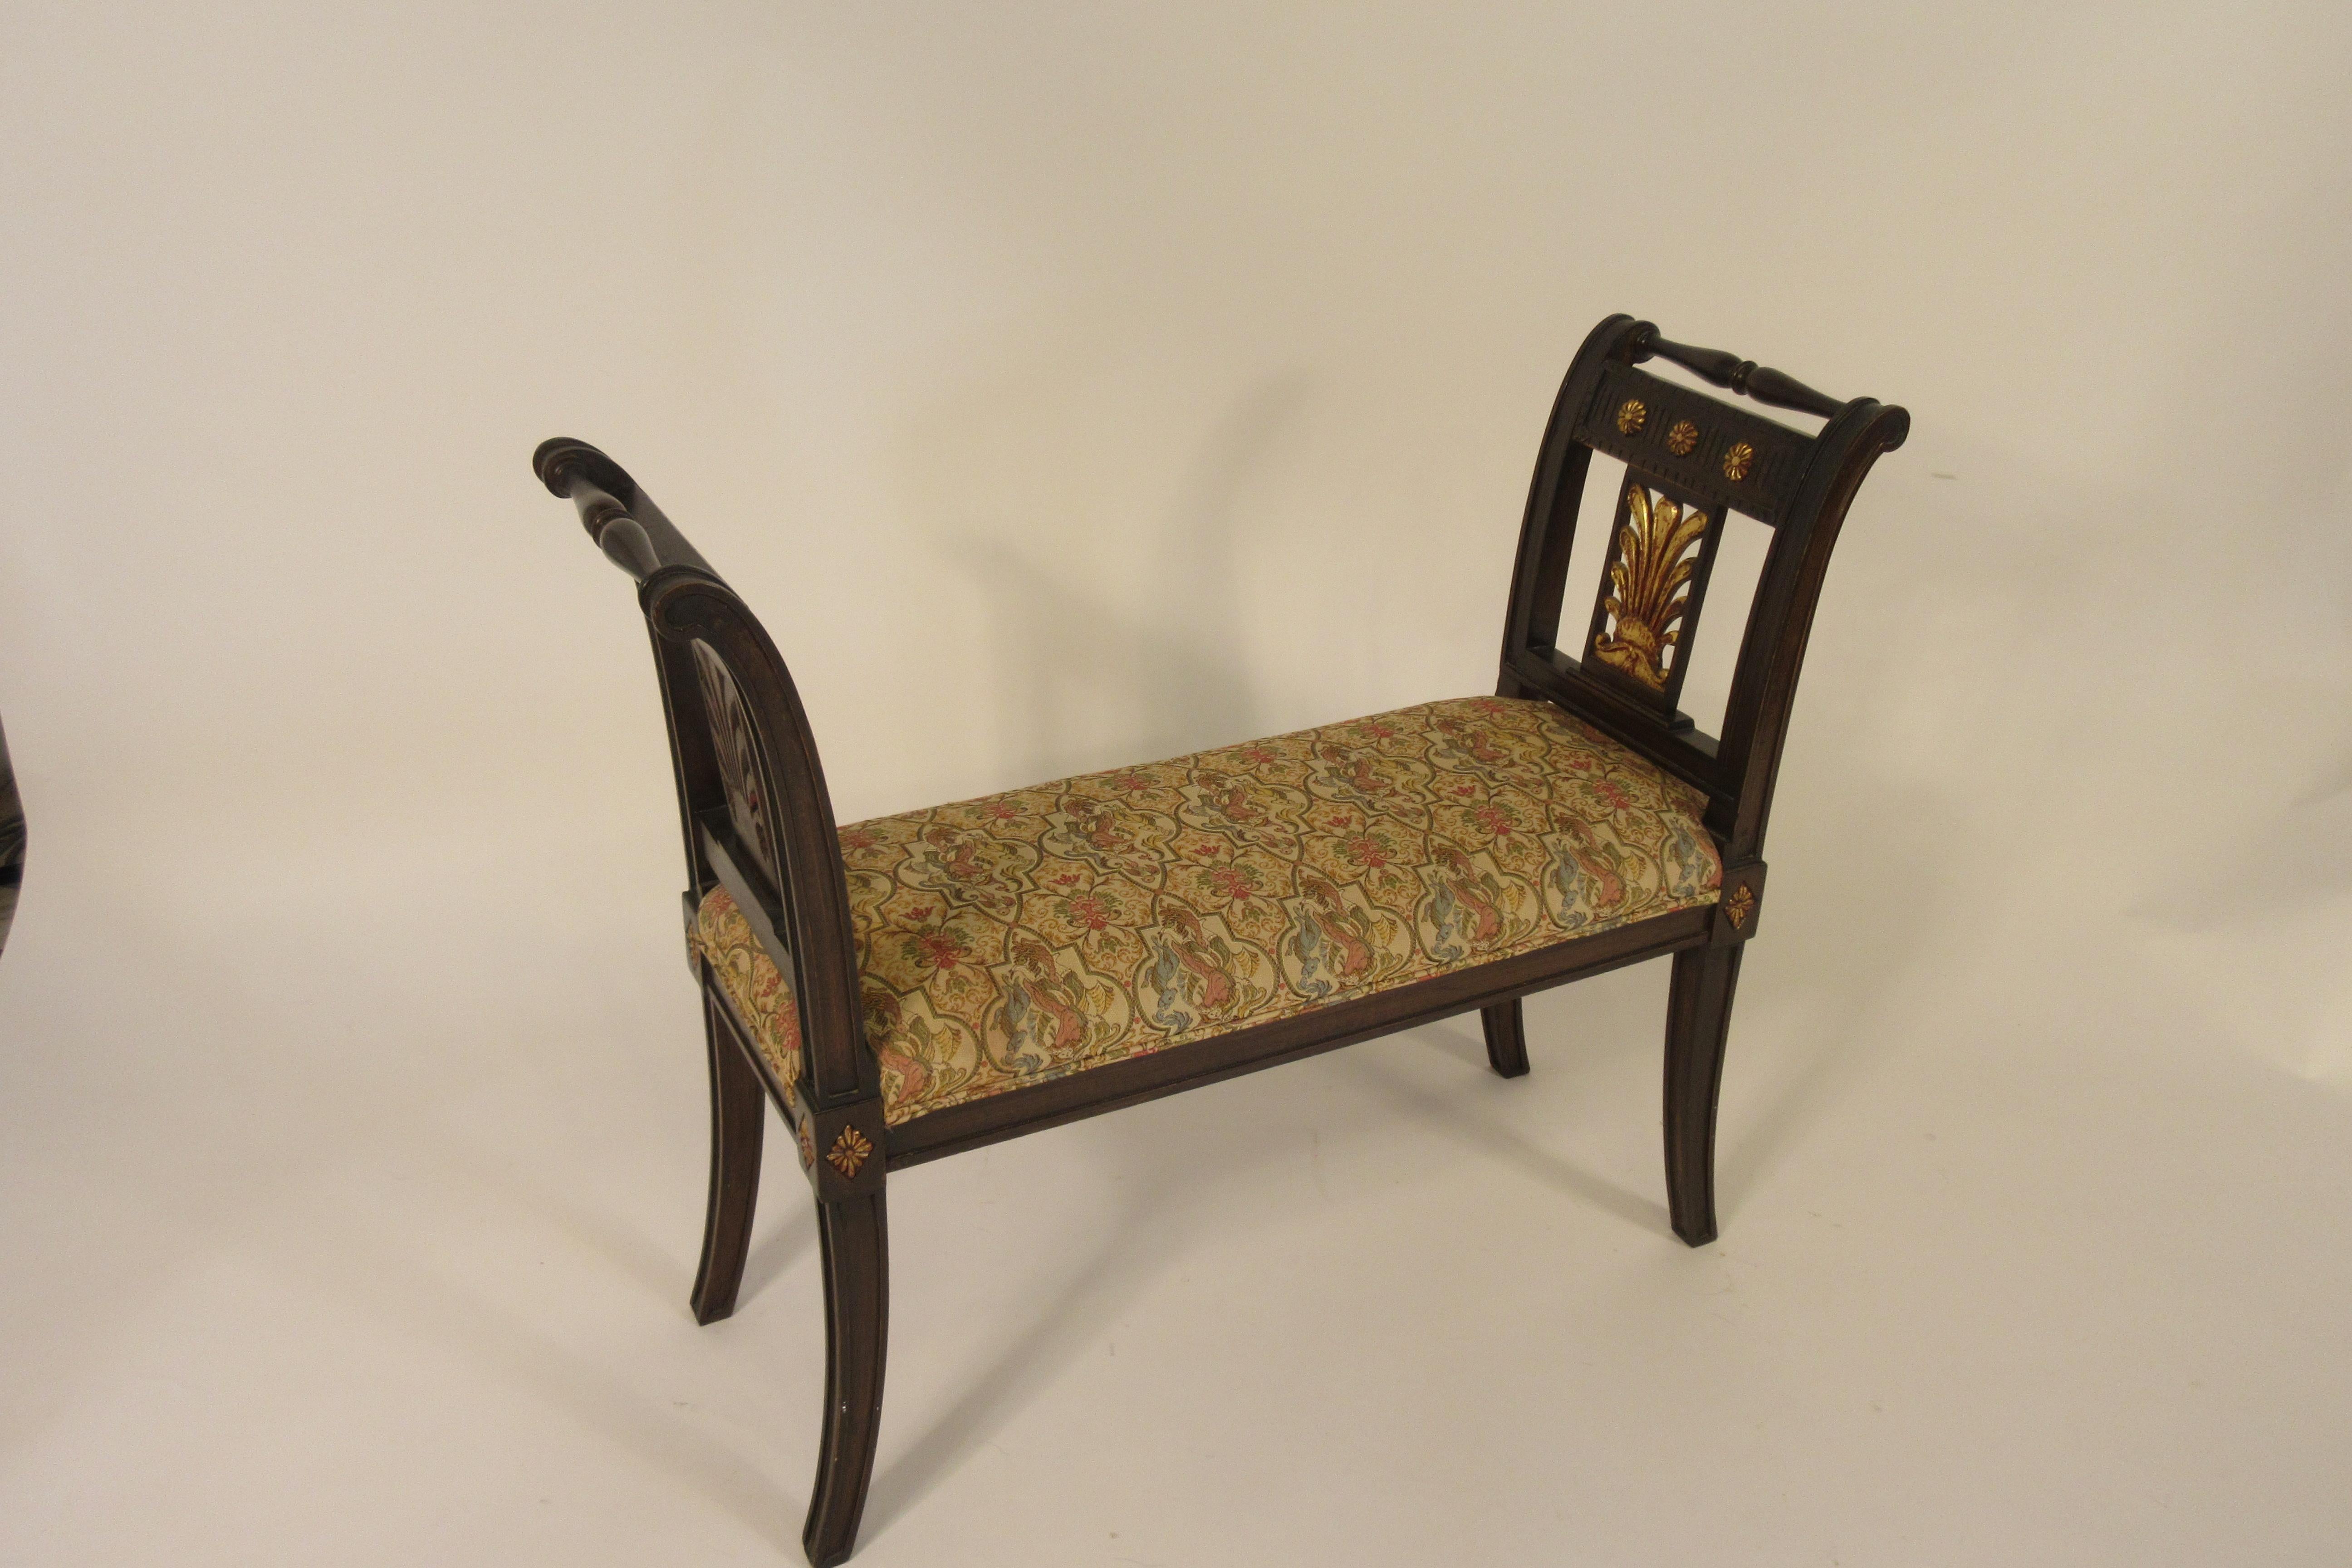 Carved Wood Classical Bench with Gilt Accents In Good Condition For Sale In Tarrytown, NY